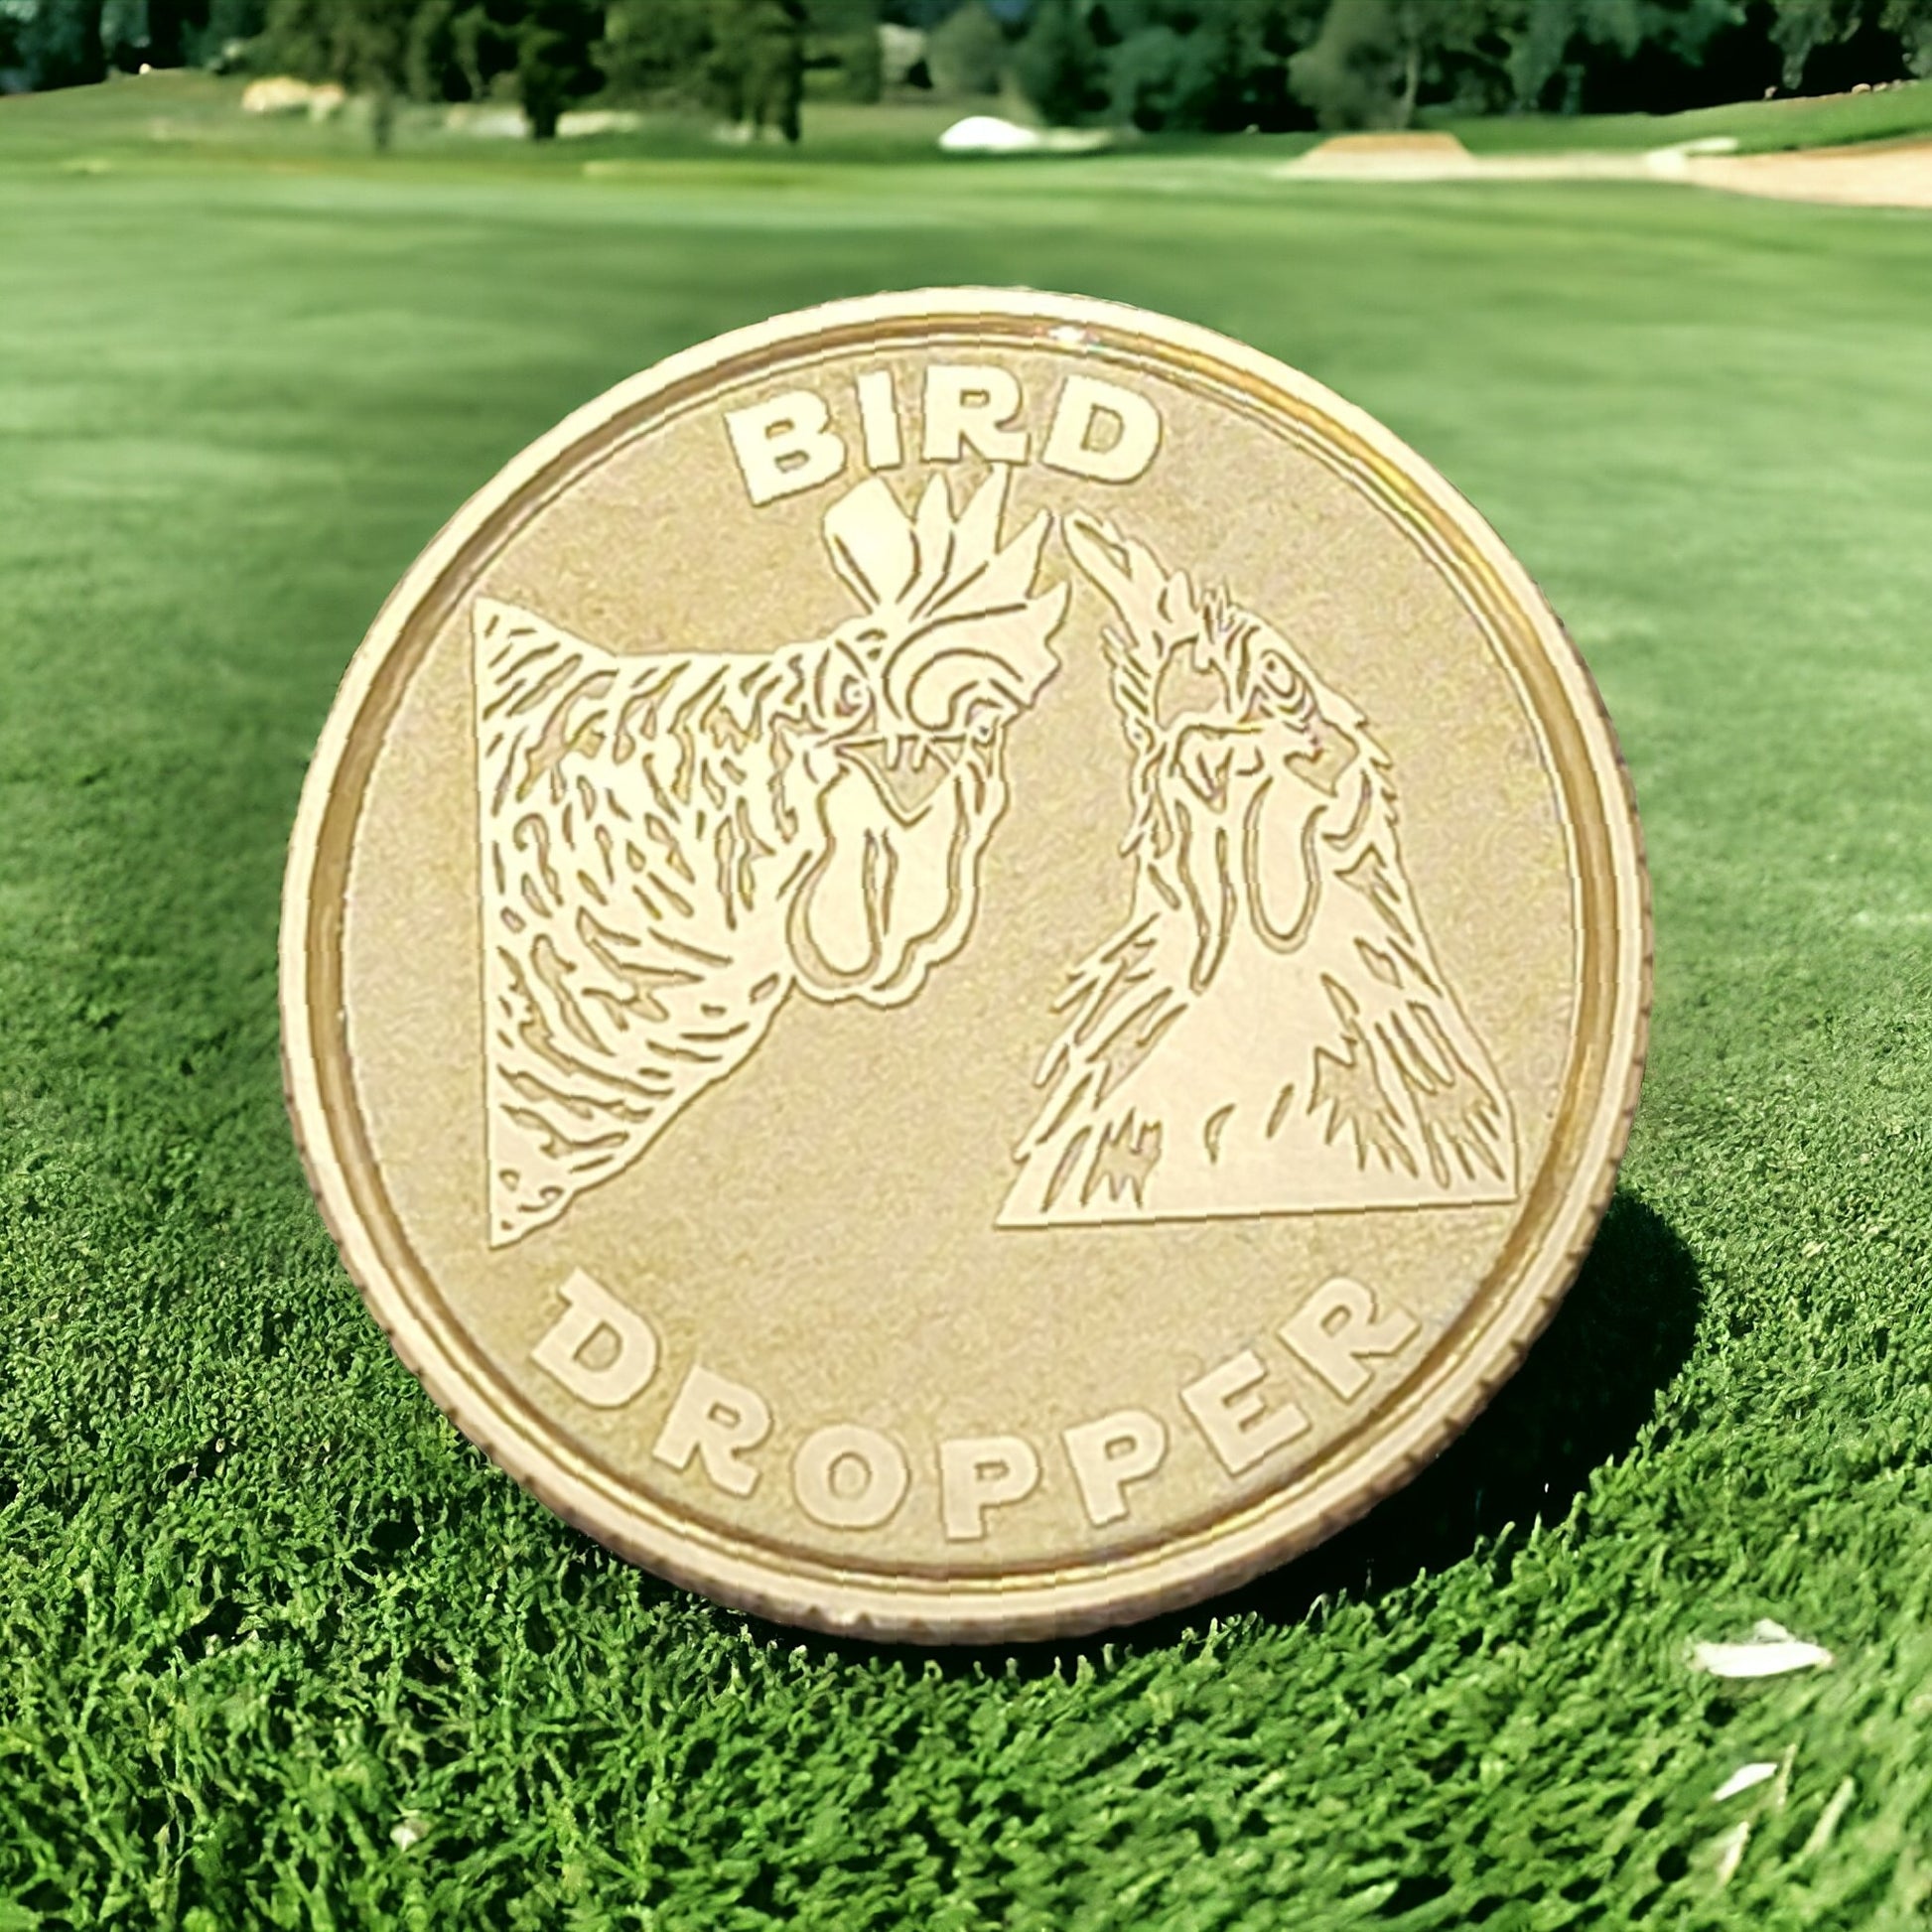 The "Bird Dropper" Solid Brass CNC Machined Laser Engraved Golf Ball Marker - River Valley Laser Works